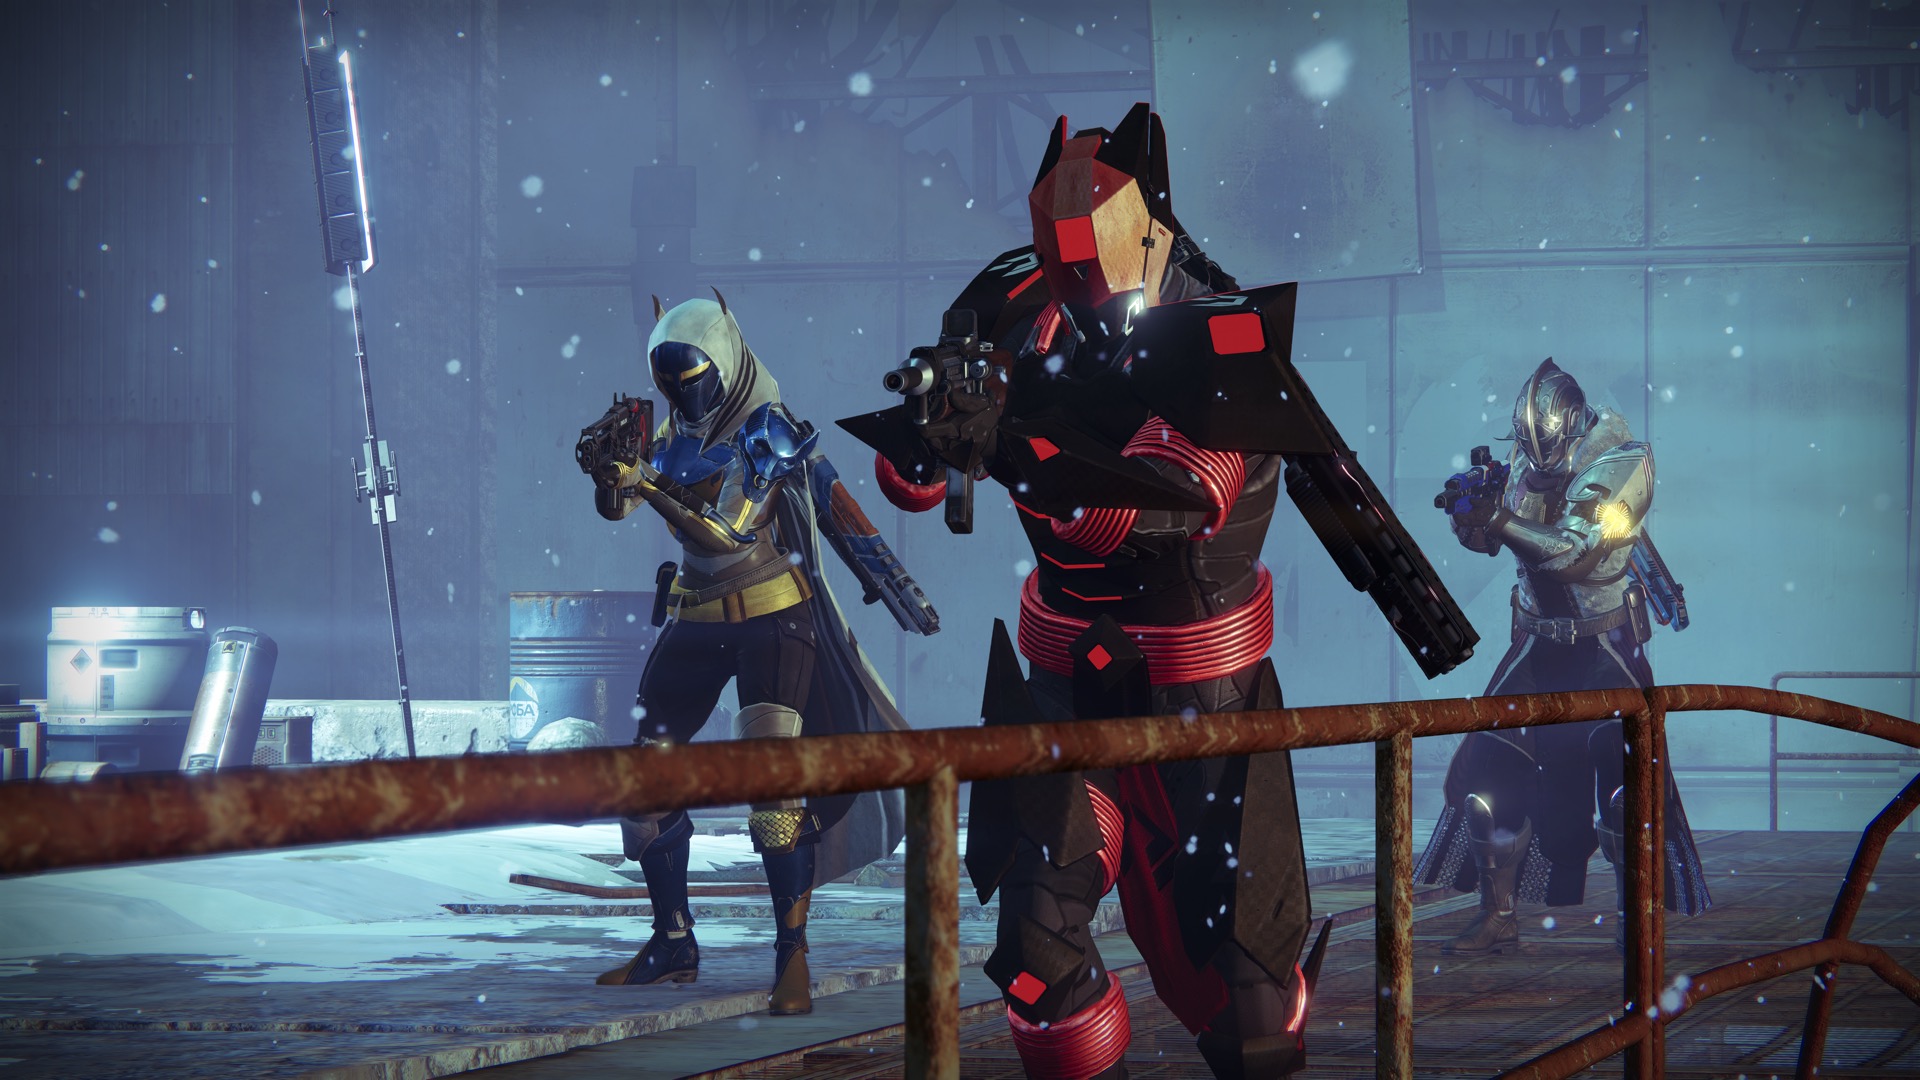 Destiny: Rise of Iron will be an exclusive for PlayStation 4 and Xbox One